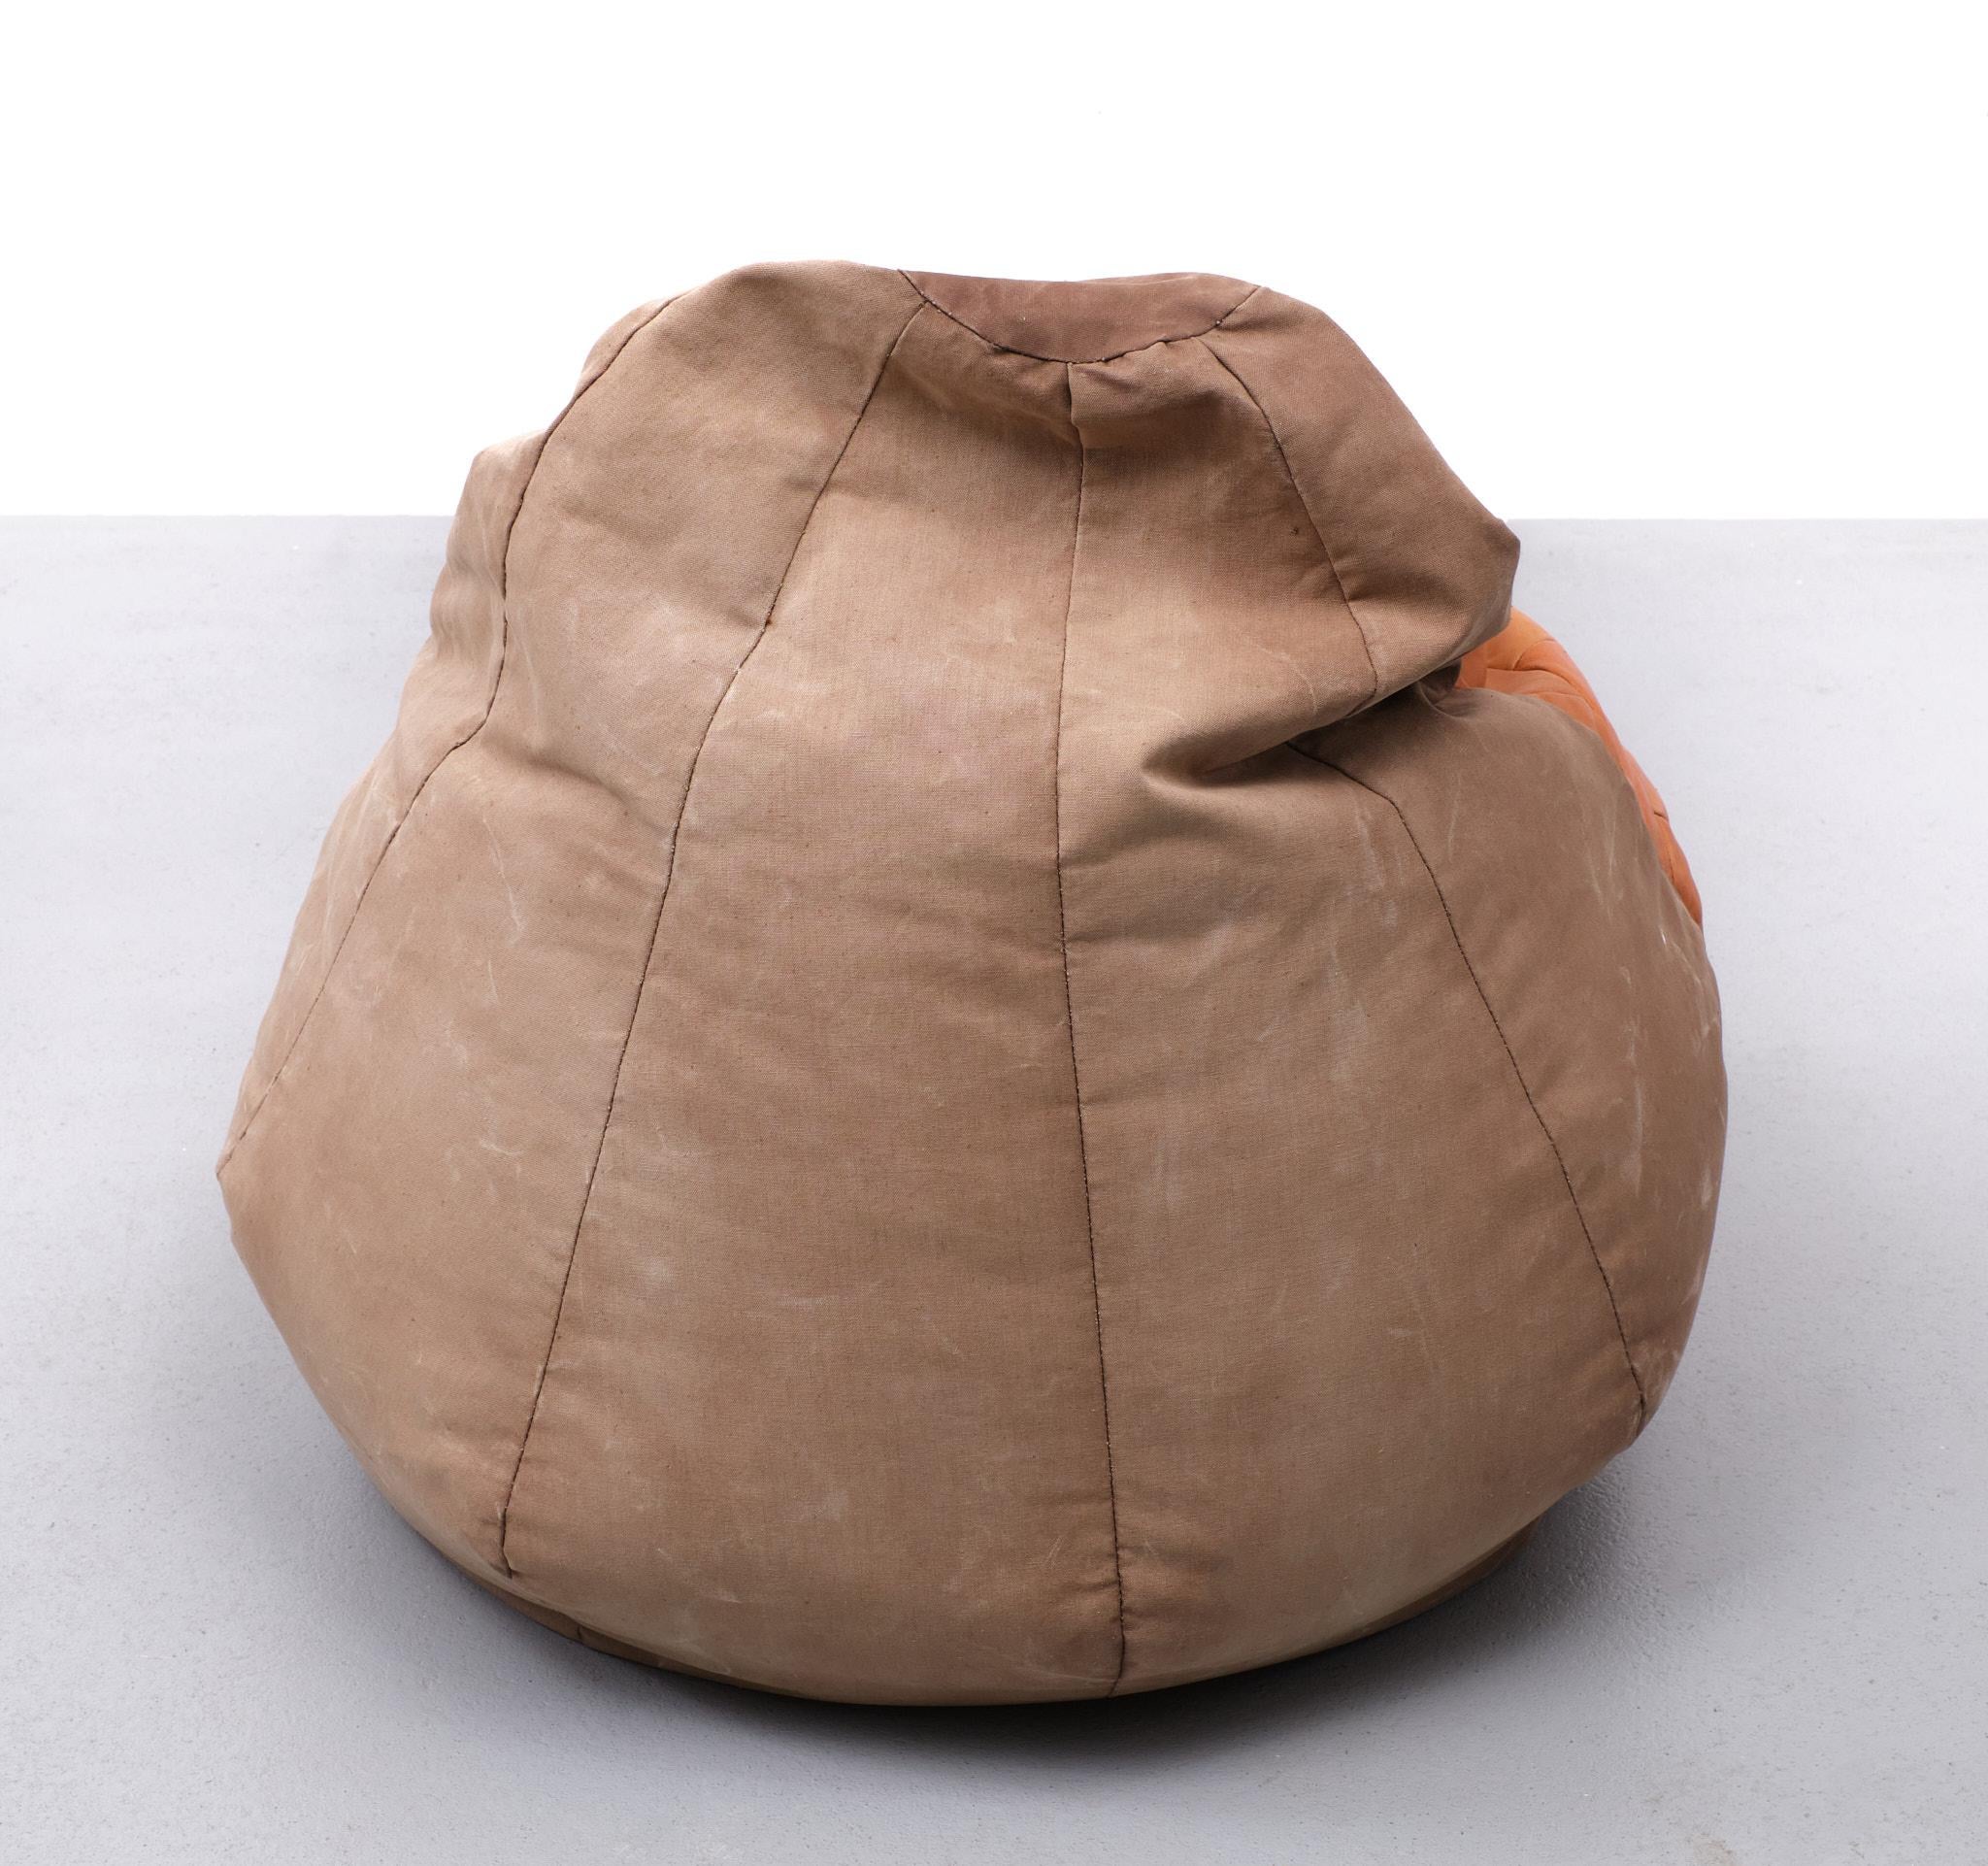 Great looking Bean Bag .Patchwork Leather . Beautiful Cognac color .
canvas on the back , Good quality natural leather with nice patina. 
In good condition. So very decorative . 

Please don't hesitate to reach out for alternative shipping quote